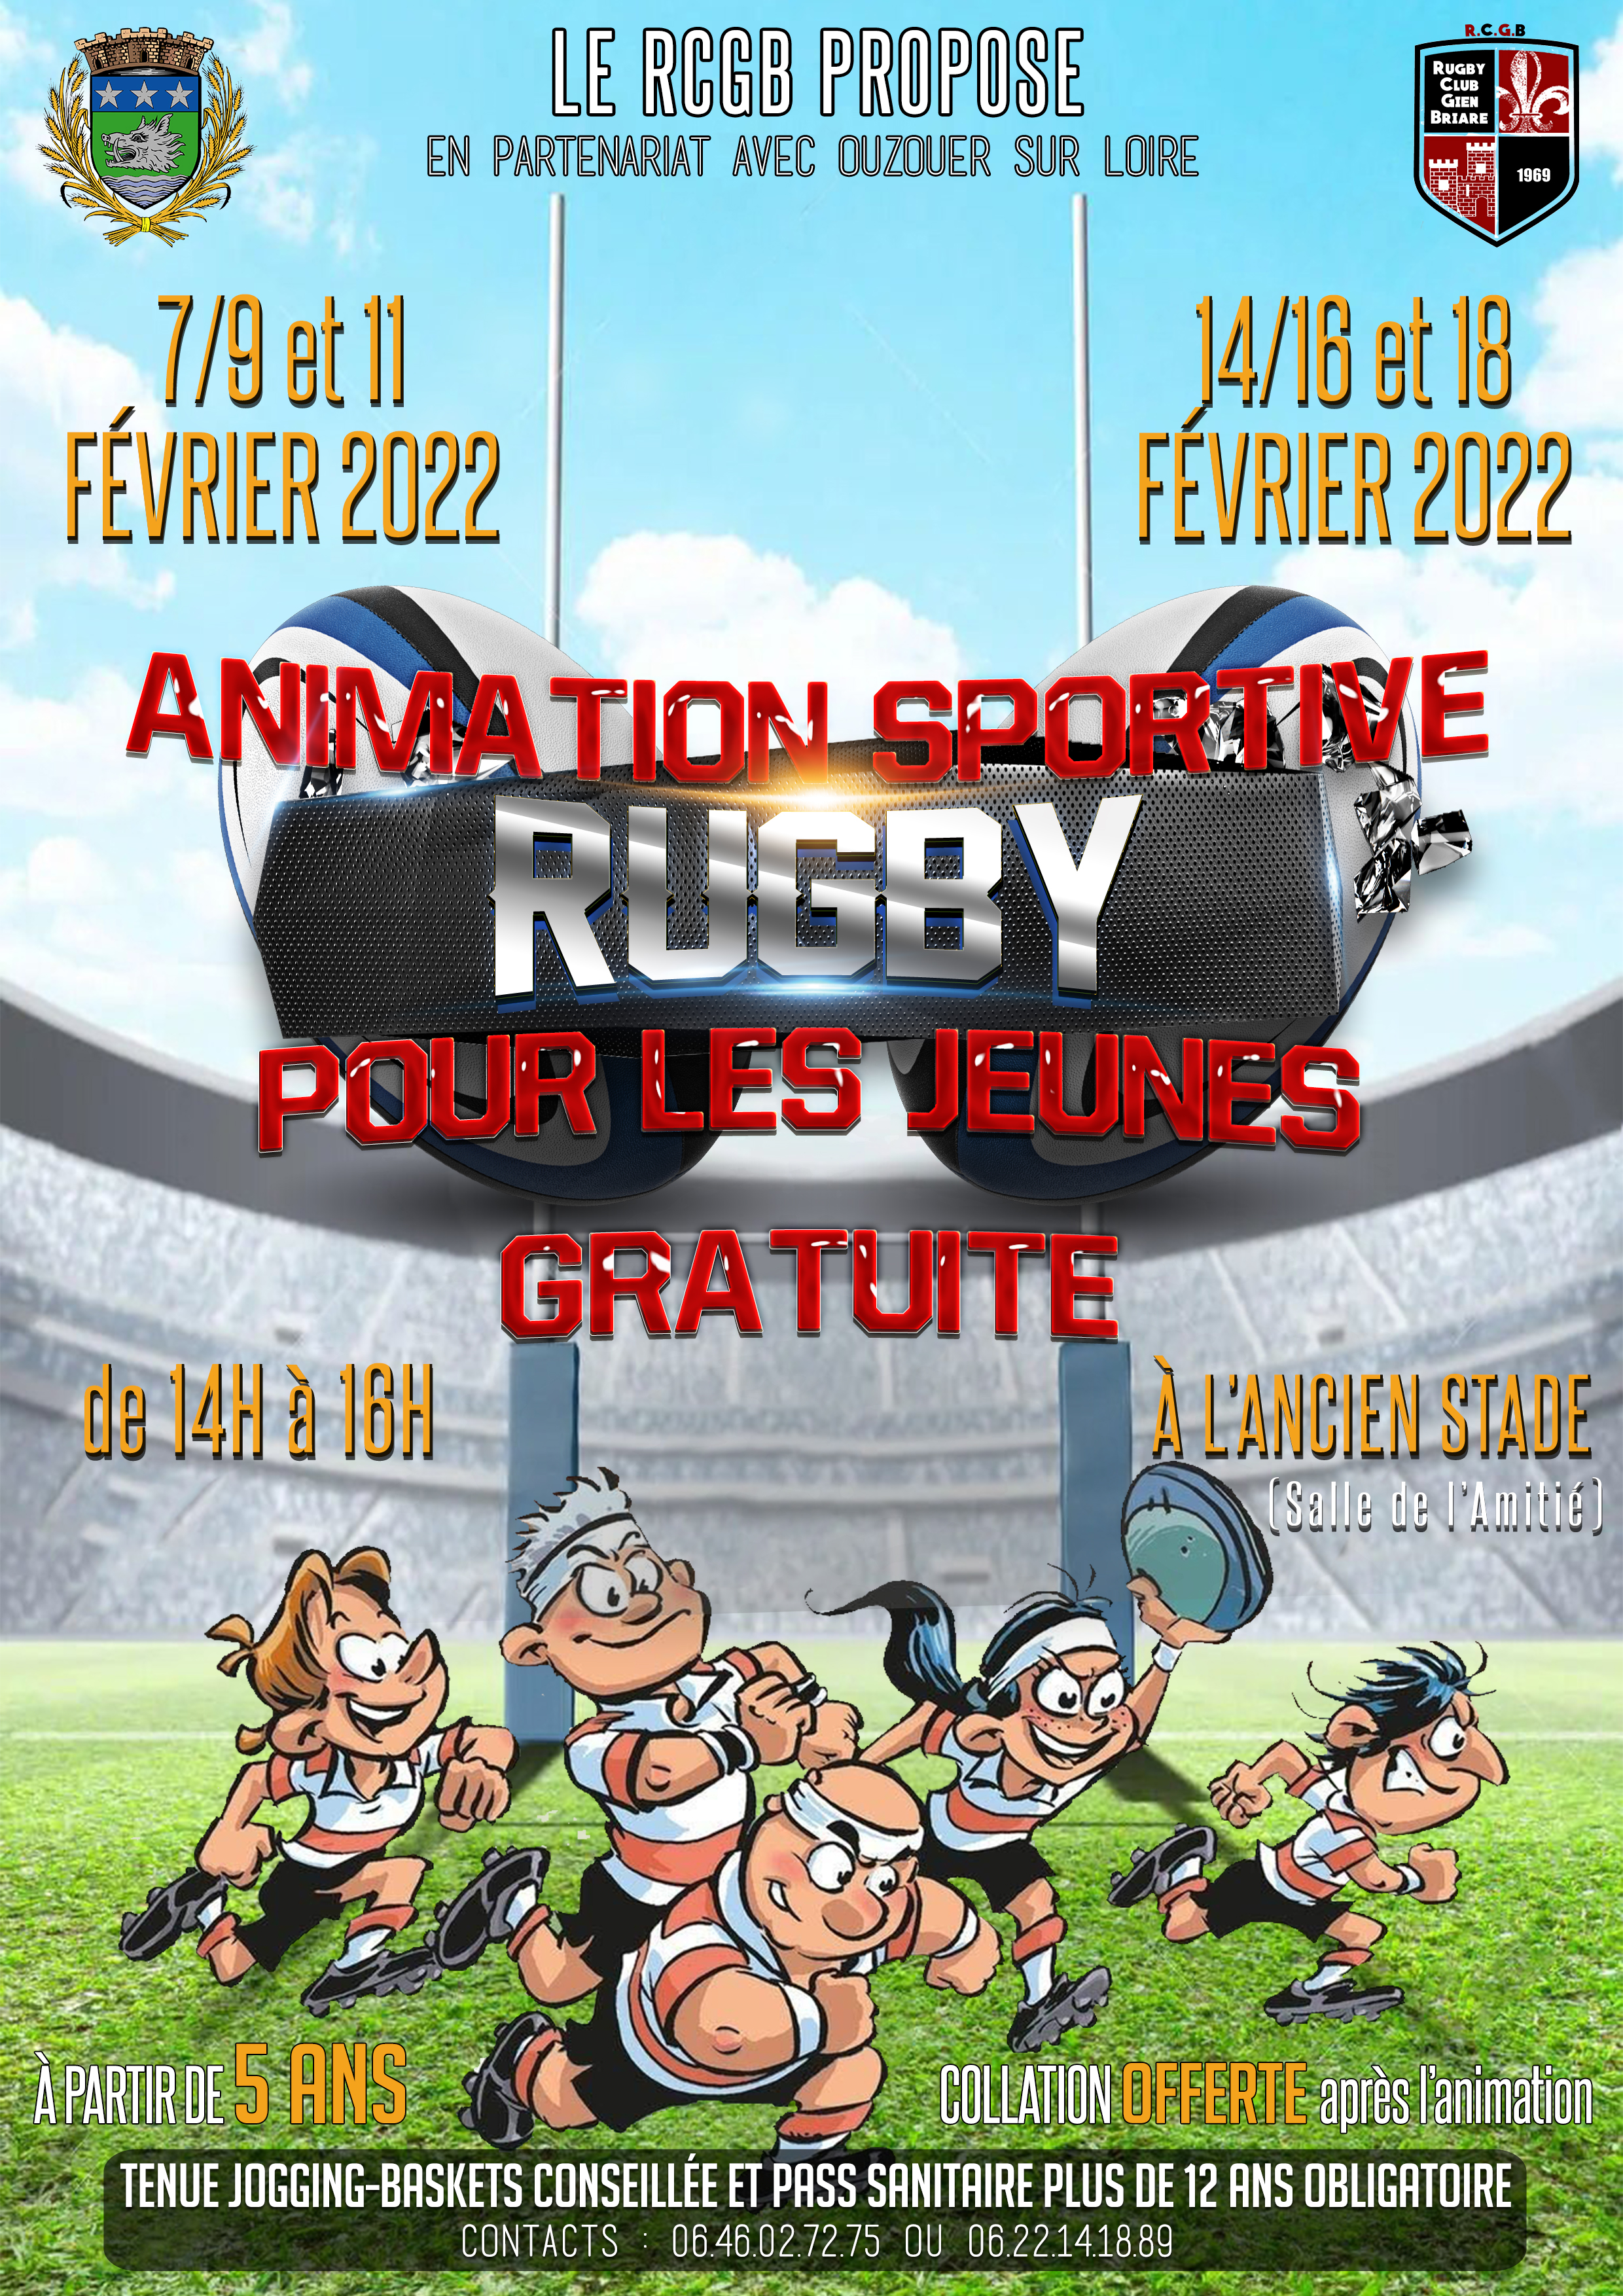 AFFICHE RUGBY